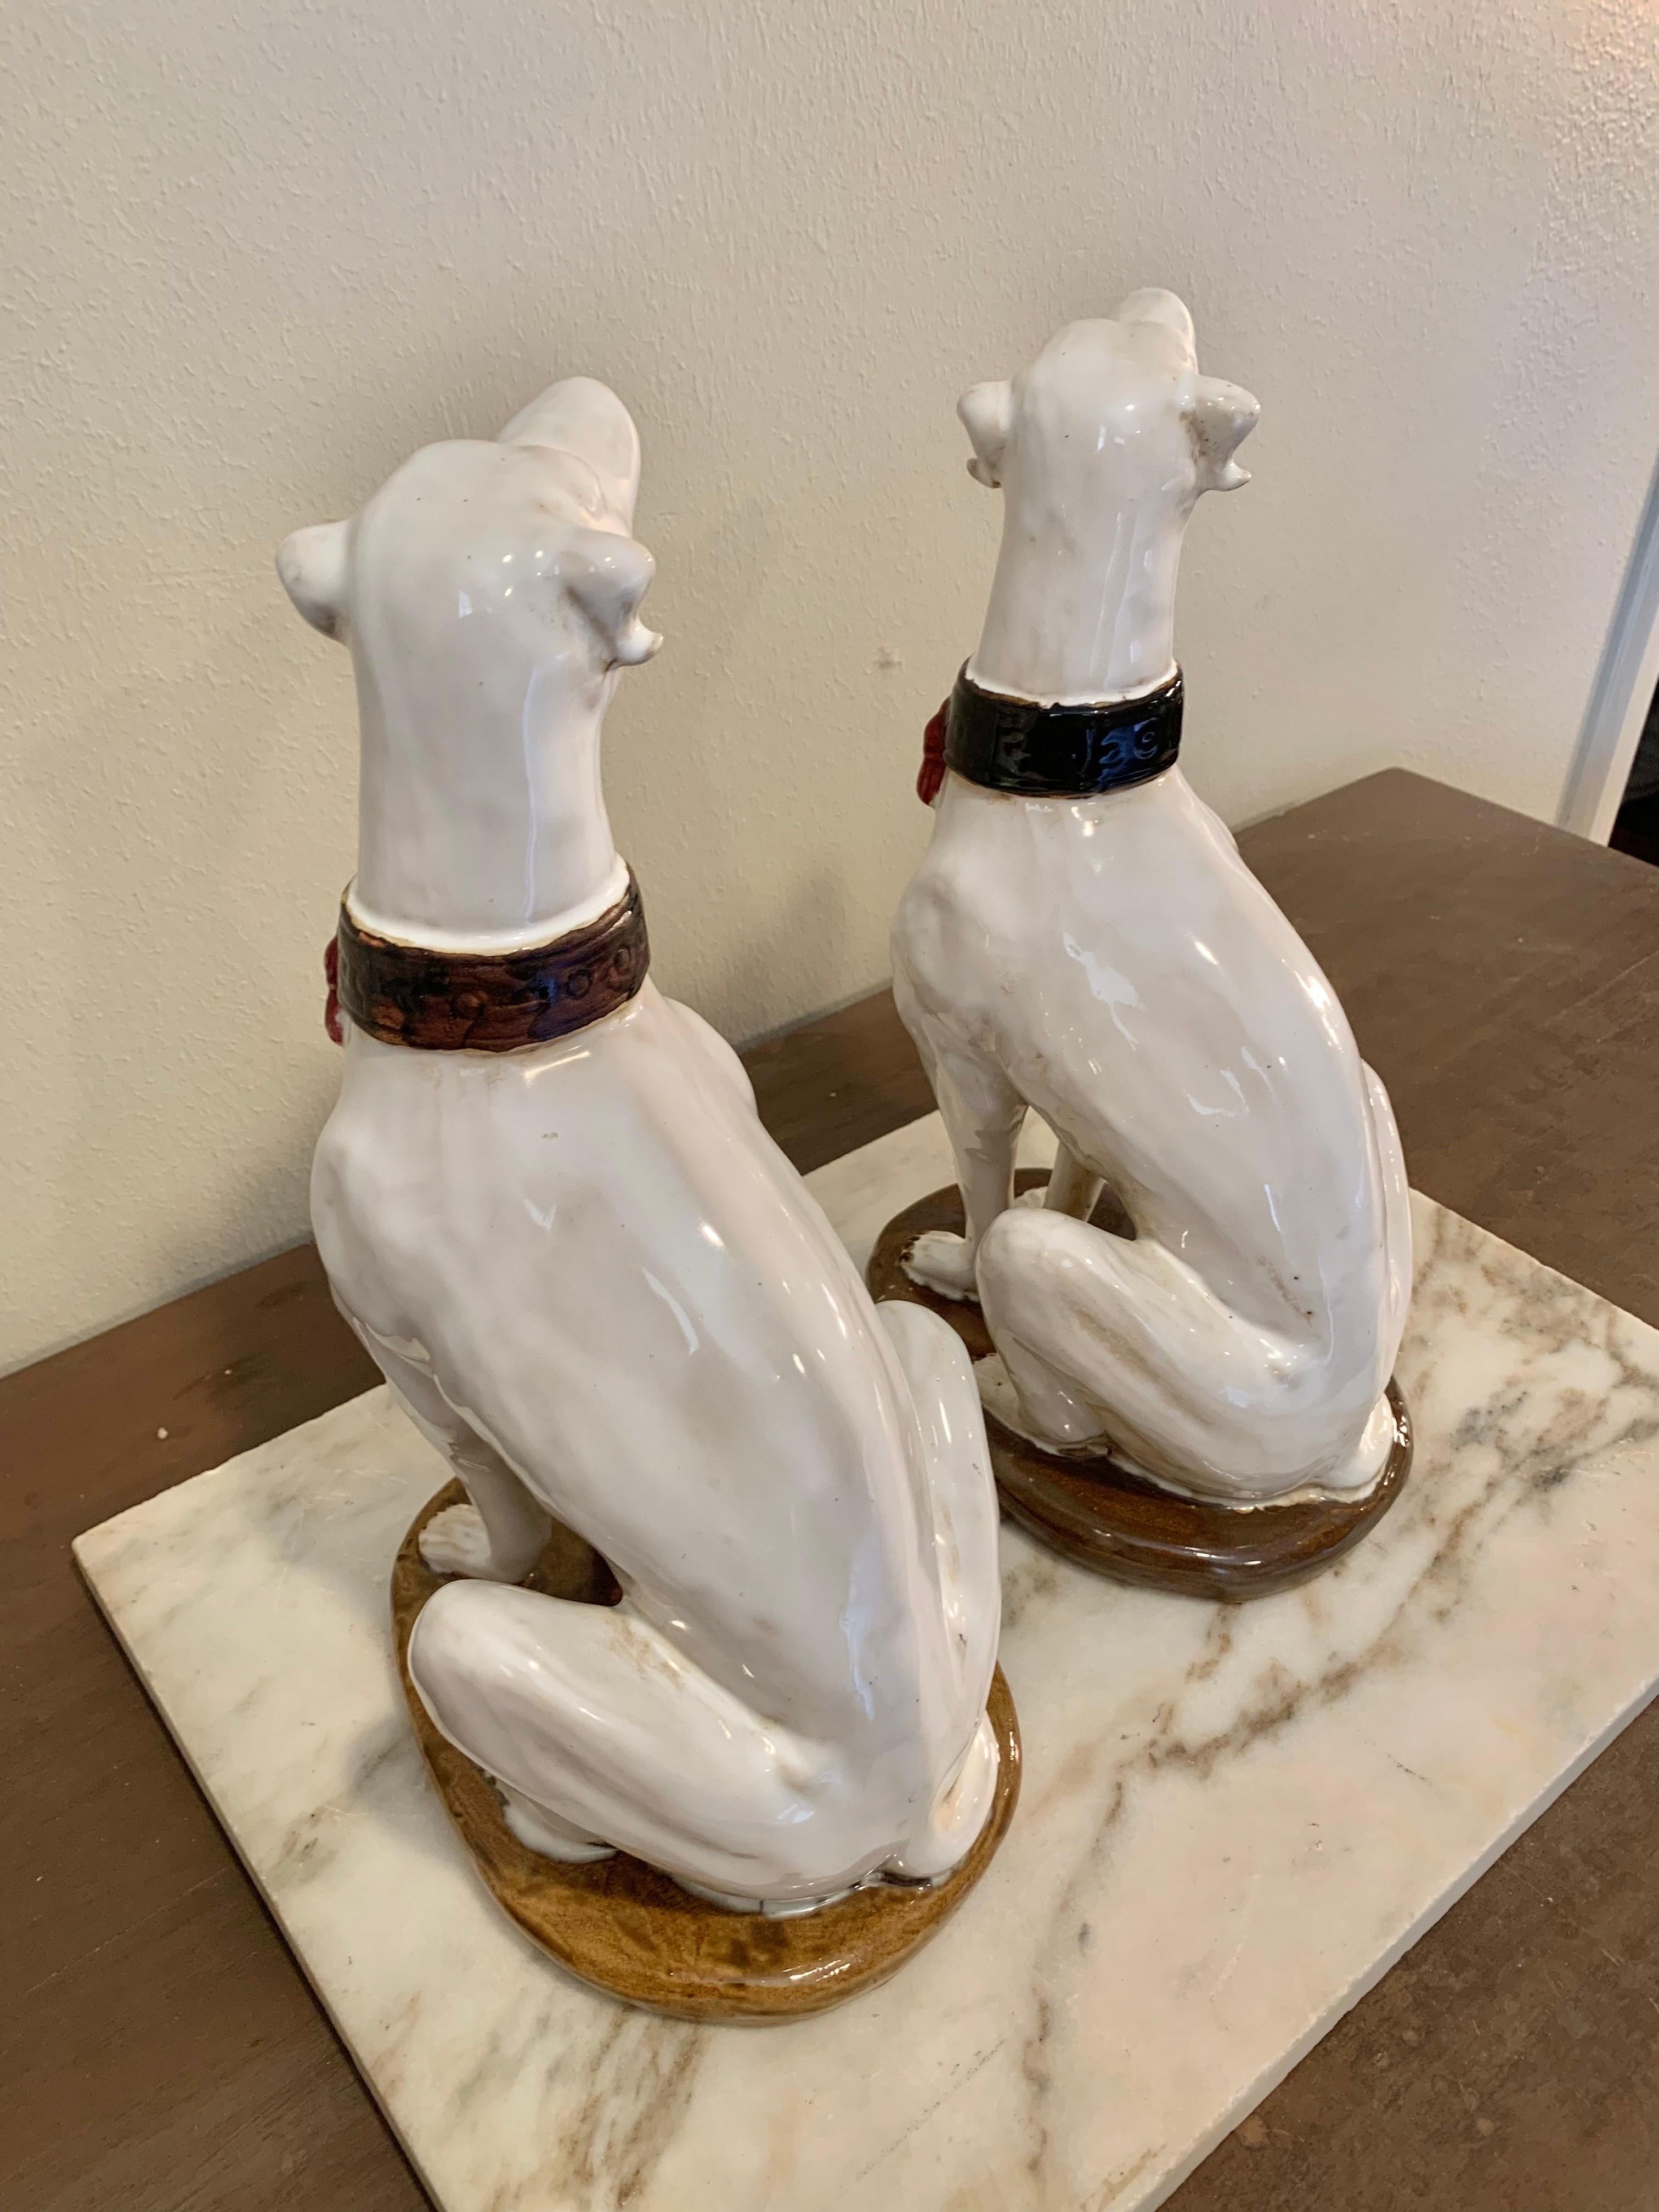 Mid 20th Century Italian Ceramic Whippet Sculptures - a Pair In Good Condition For Sale In Burton, TX